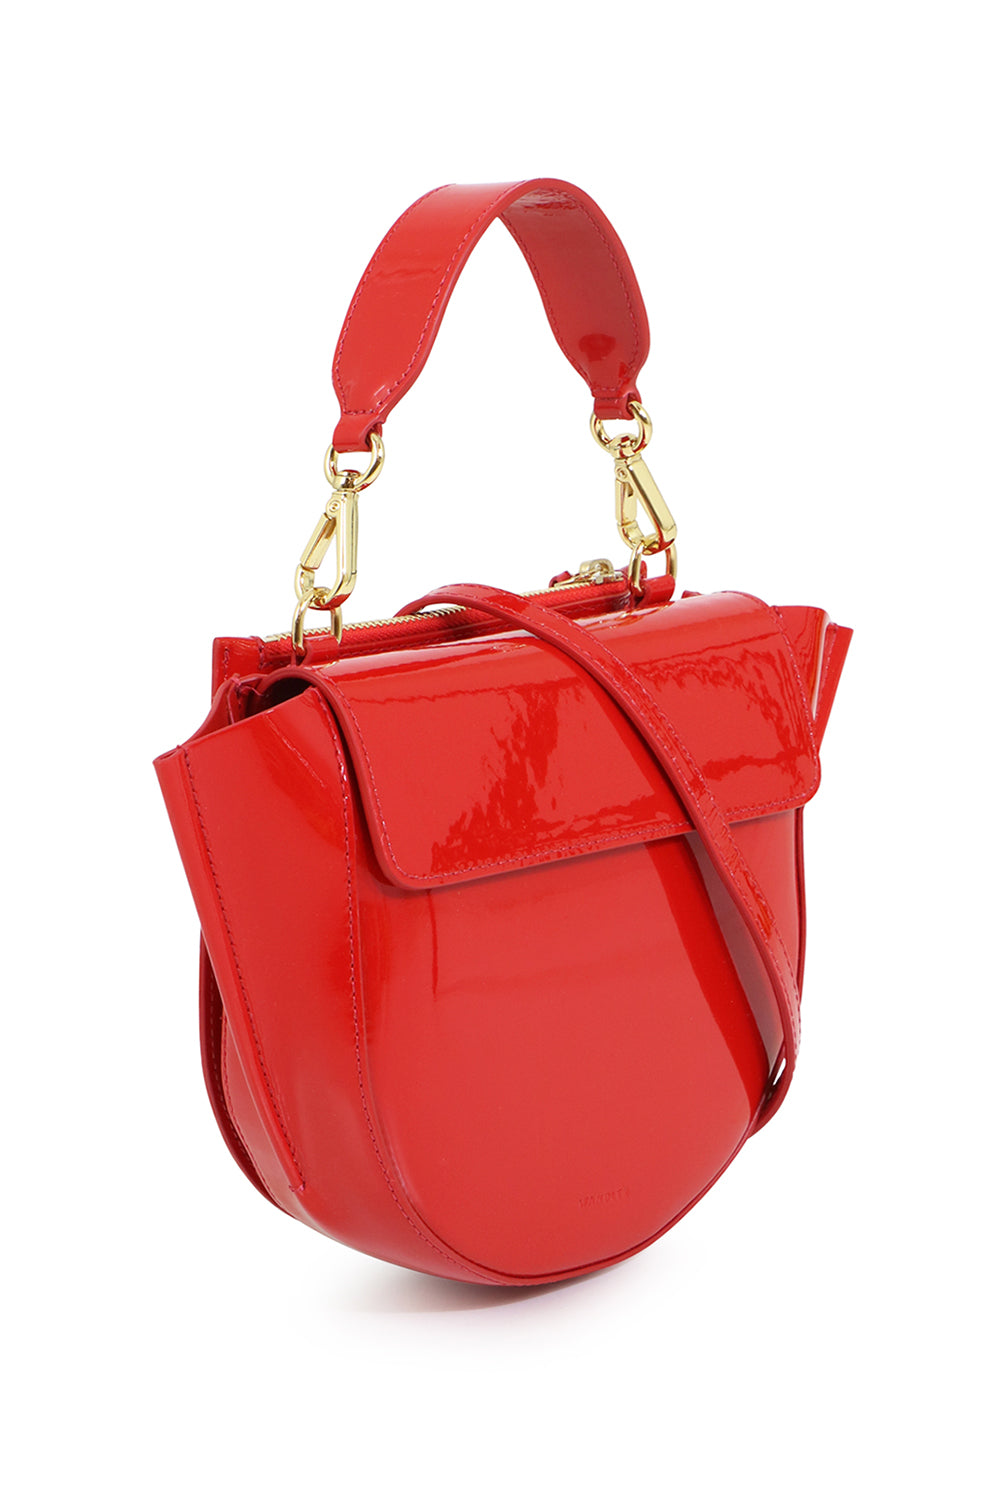 WANDLER BAGS RED HORTENSIA MINI BAG RED LACQUER